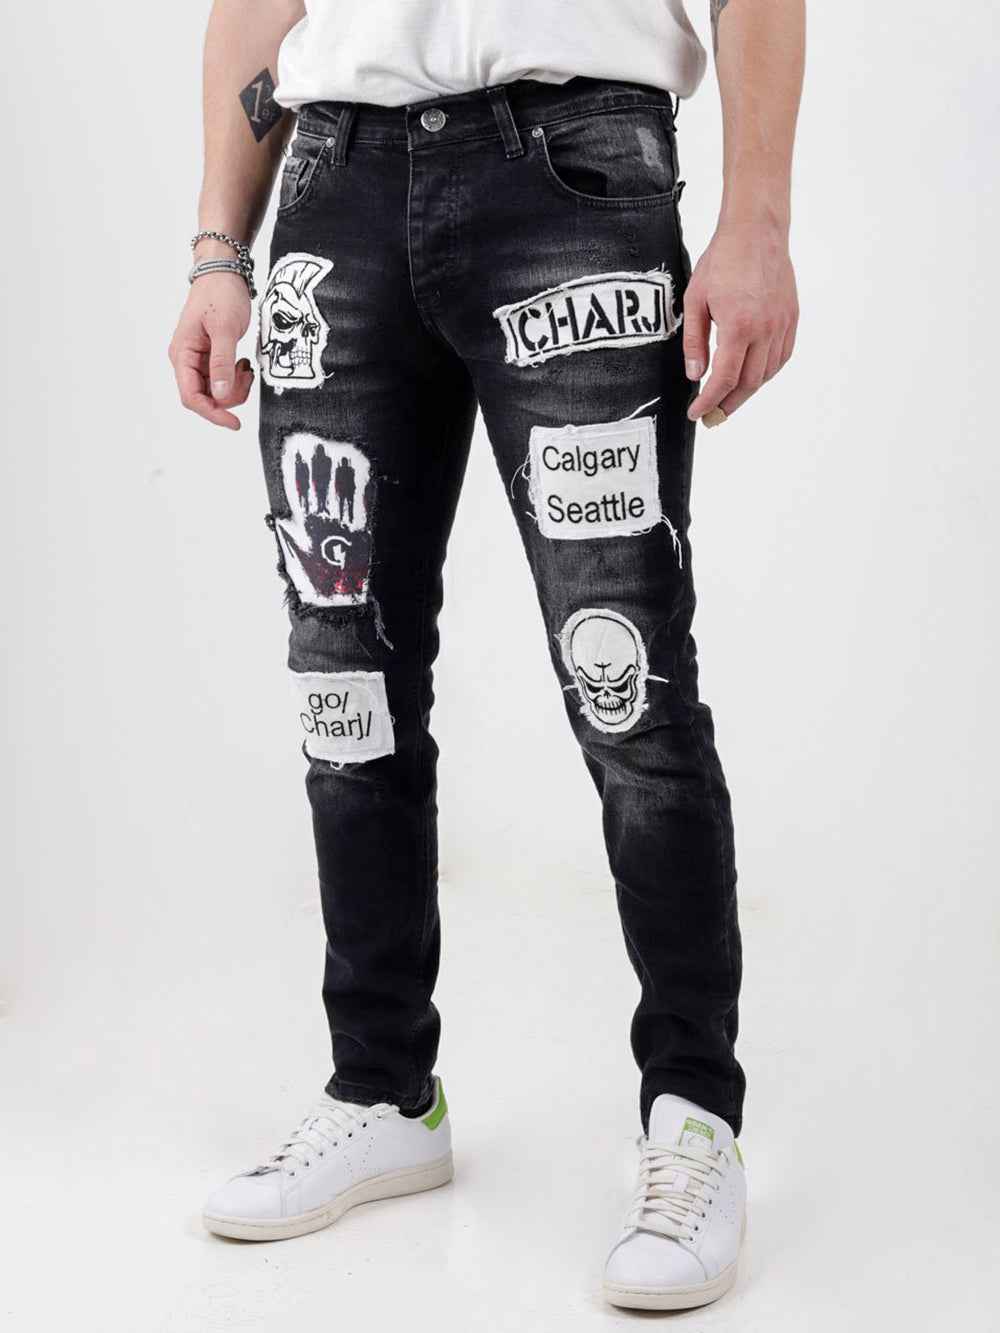 A man wearing BLACK HEADSTONE jeans with patches on them.